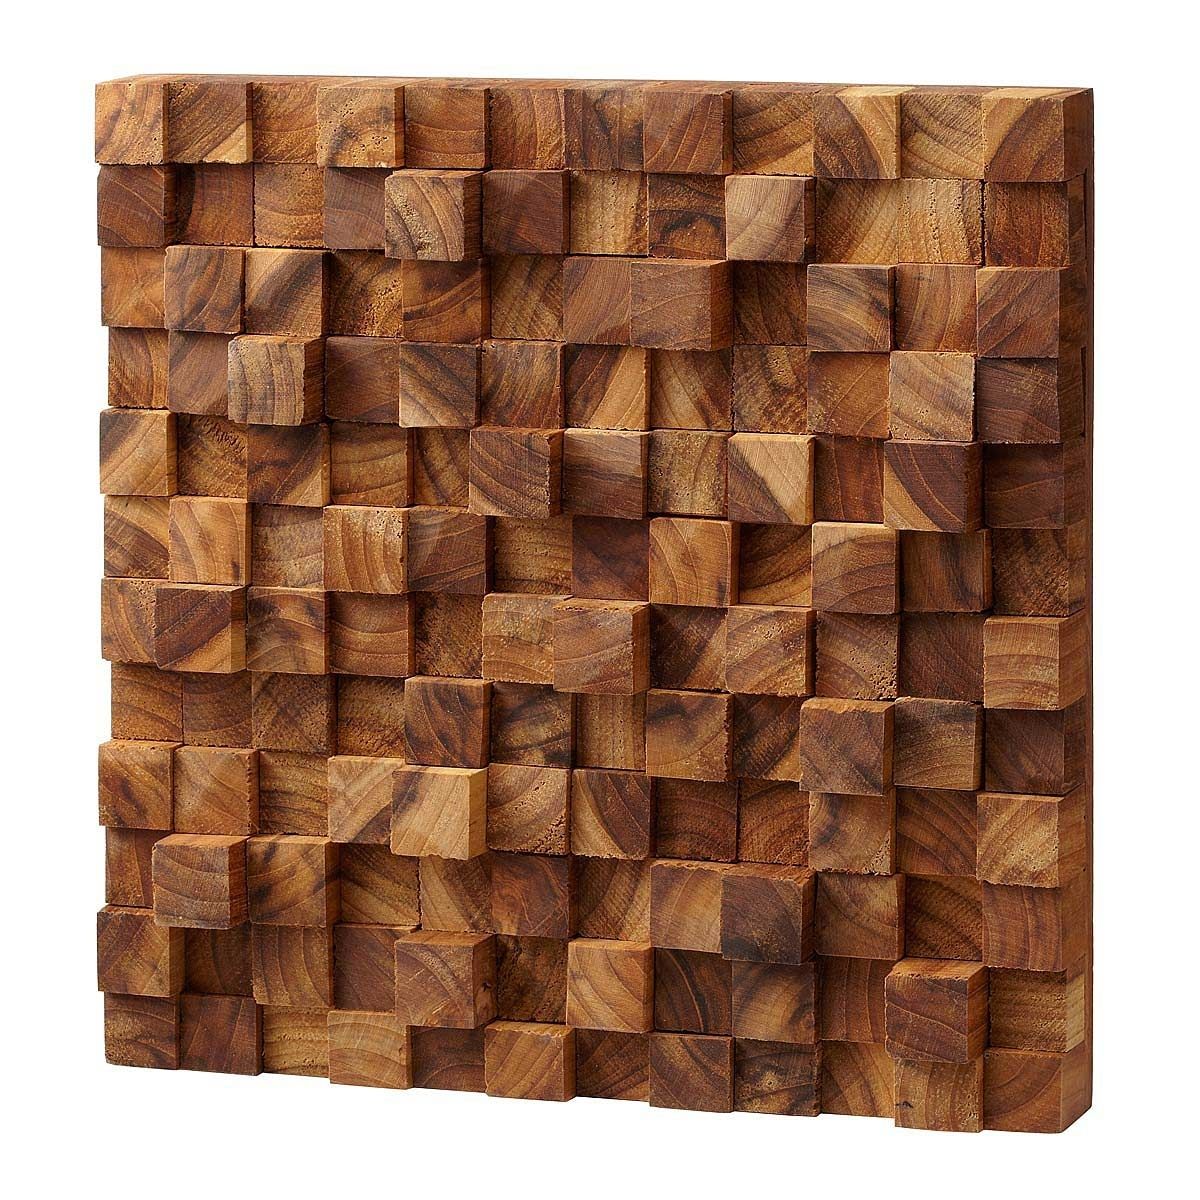 Square Takara Wall Art | Teak Wood, 3d Art | Uncommongoods Within Wooden Wall Art (View 5 of 20)